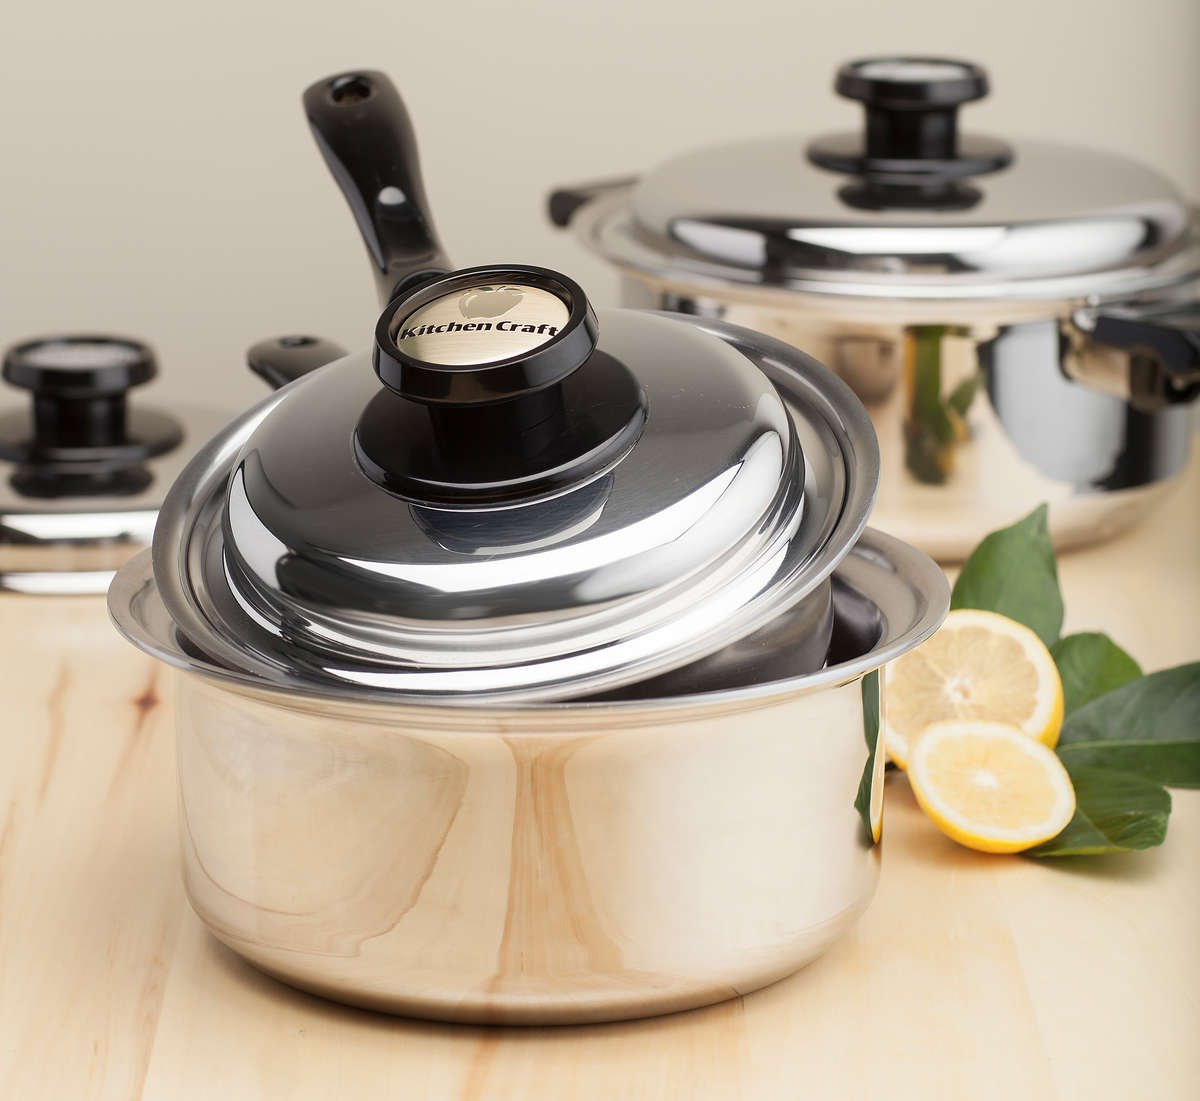 Kitchen Craft Waterless Cookware - We have so many new followers but aren't  necessarily new to the Kitchen Craft Cookware family. How long have you had  your cookware and where did you